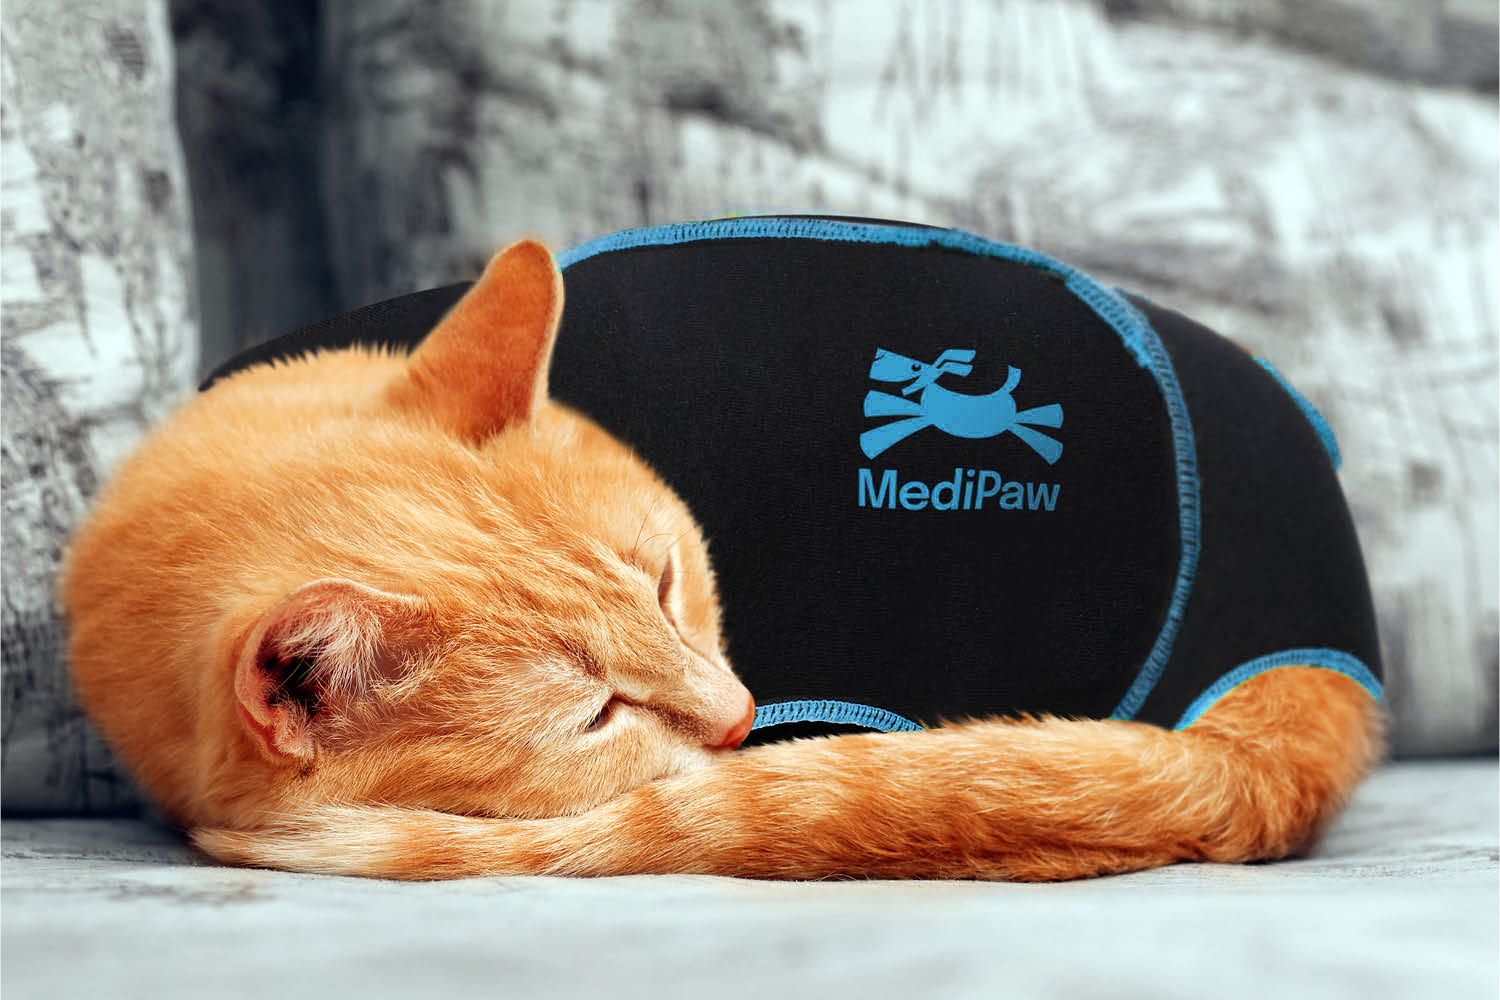 orange tabby laying down wearing protective cat suit